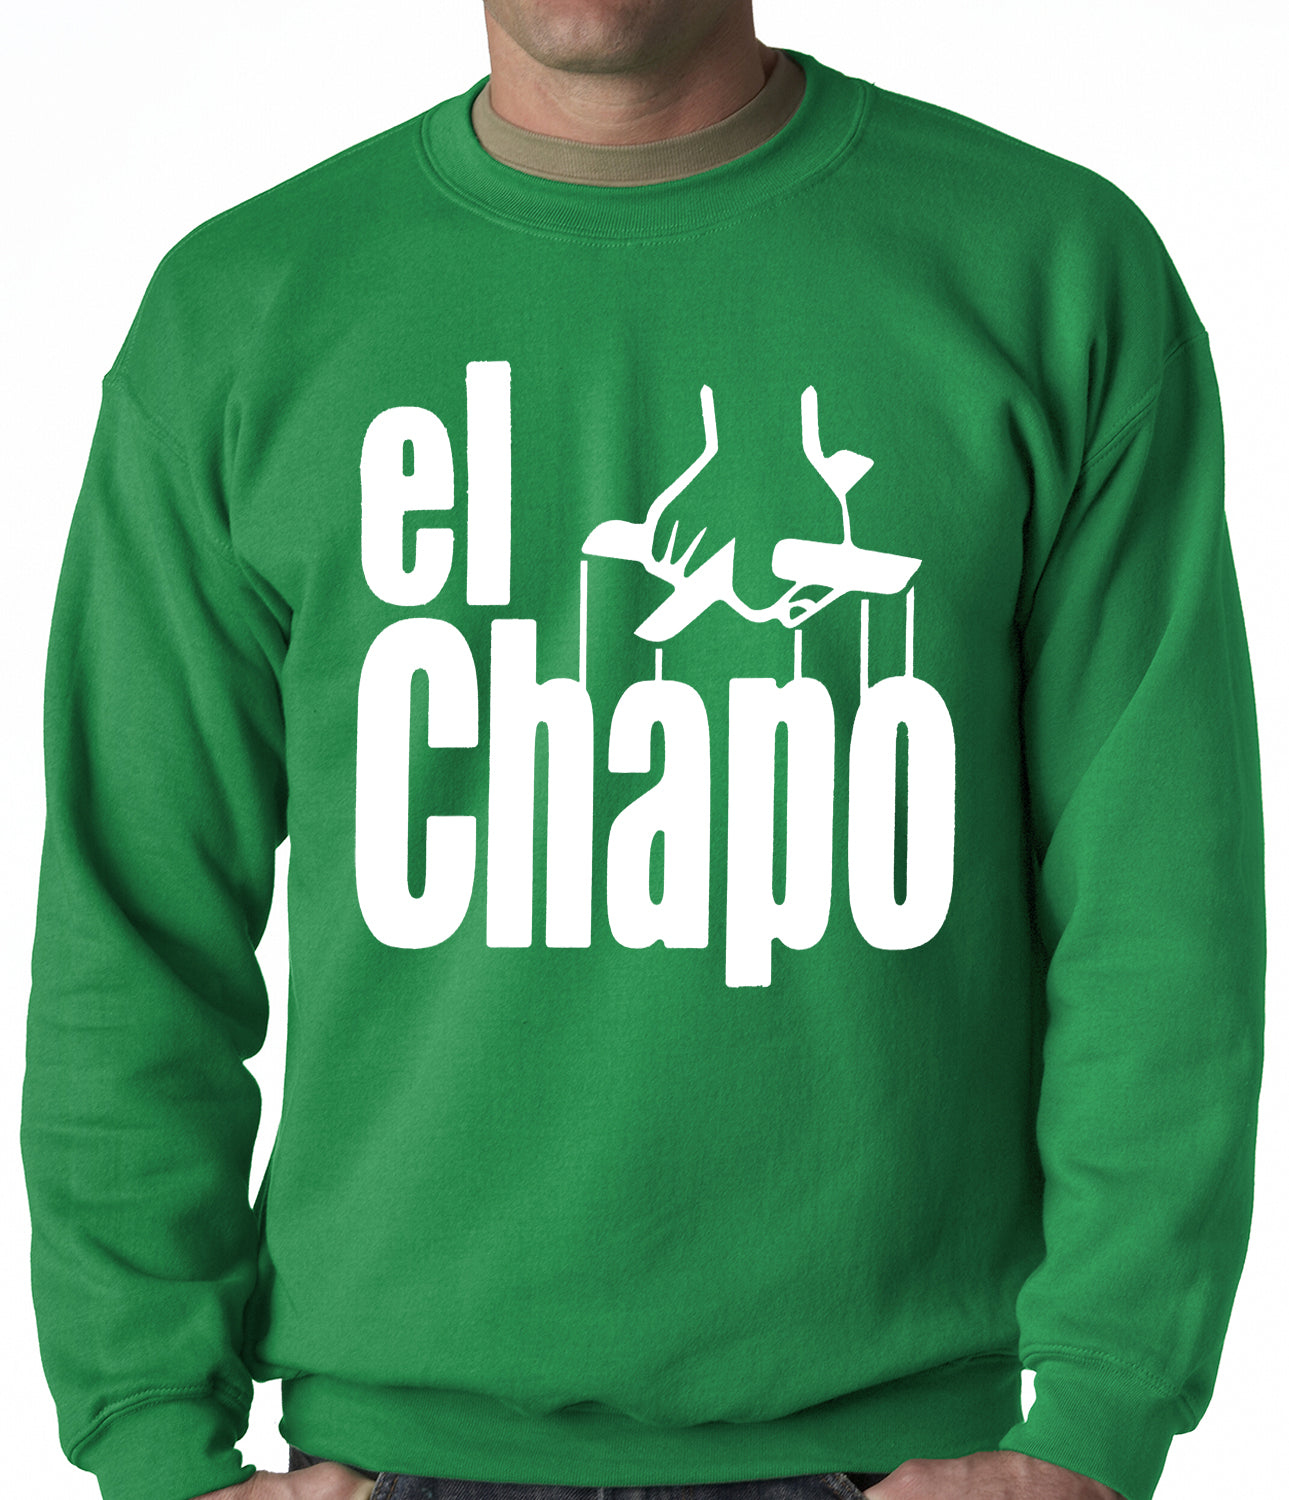 The God Father Inspired El Chapo Adult Crewneck